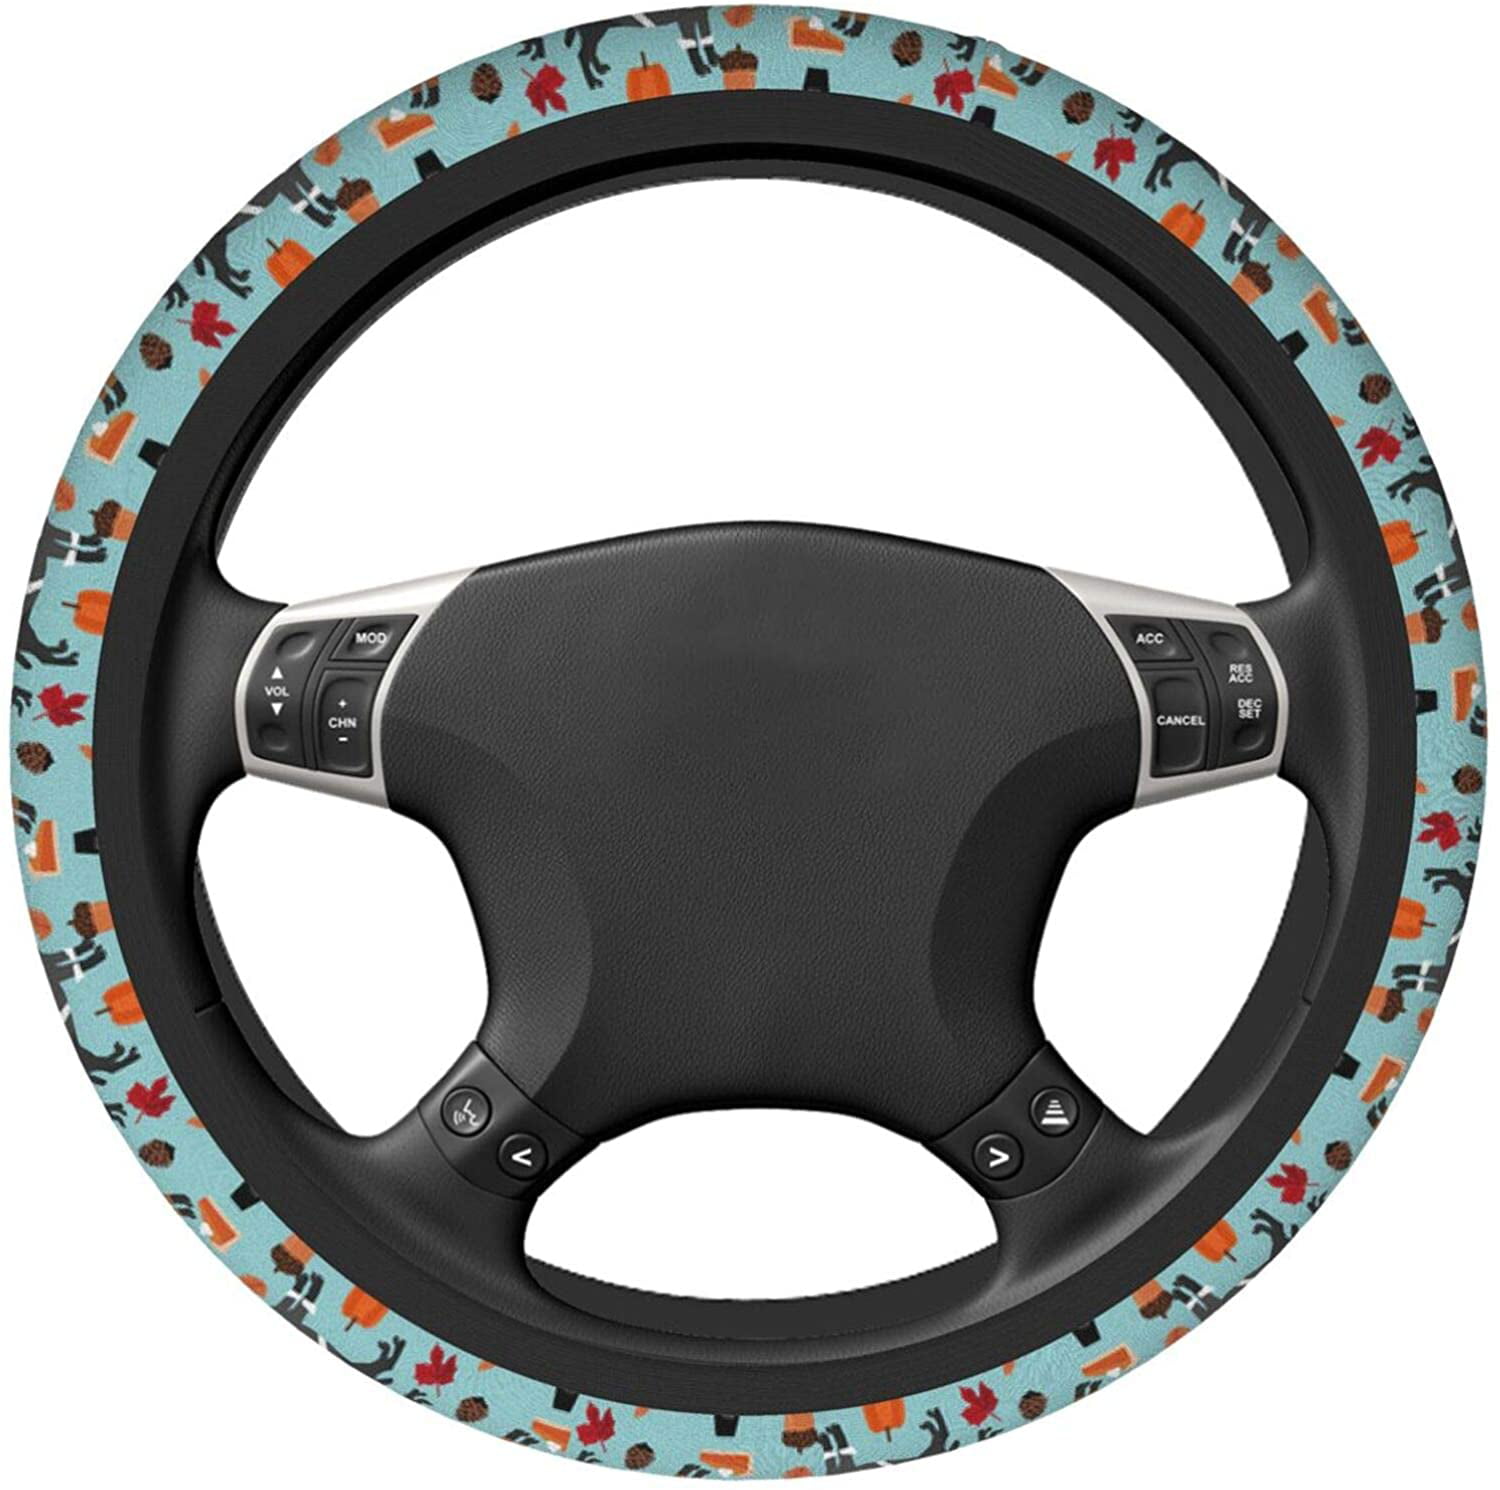 Greyhound Black Art Dog Steering Wheel Cover Breathable Auto Car Steering Wheel Cover for Unisex Universal 15 Inches Customized Gift